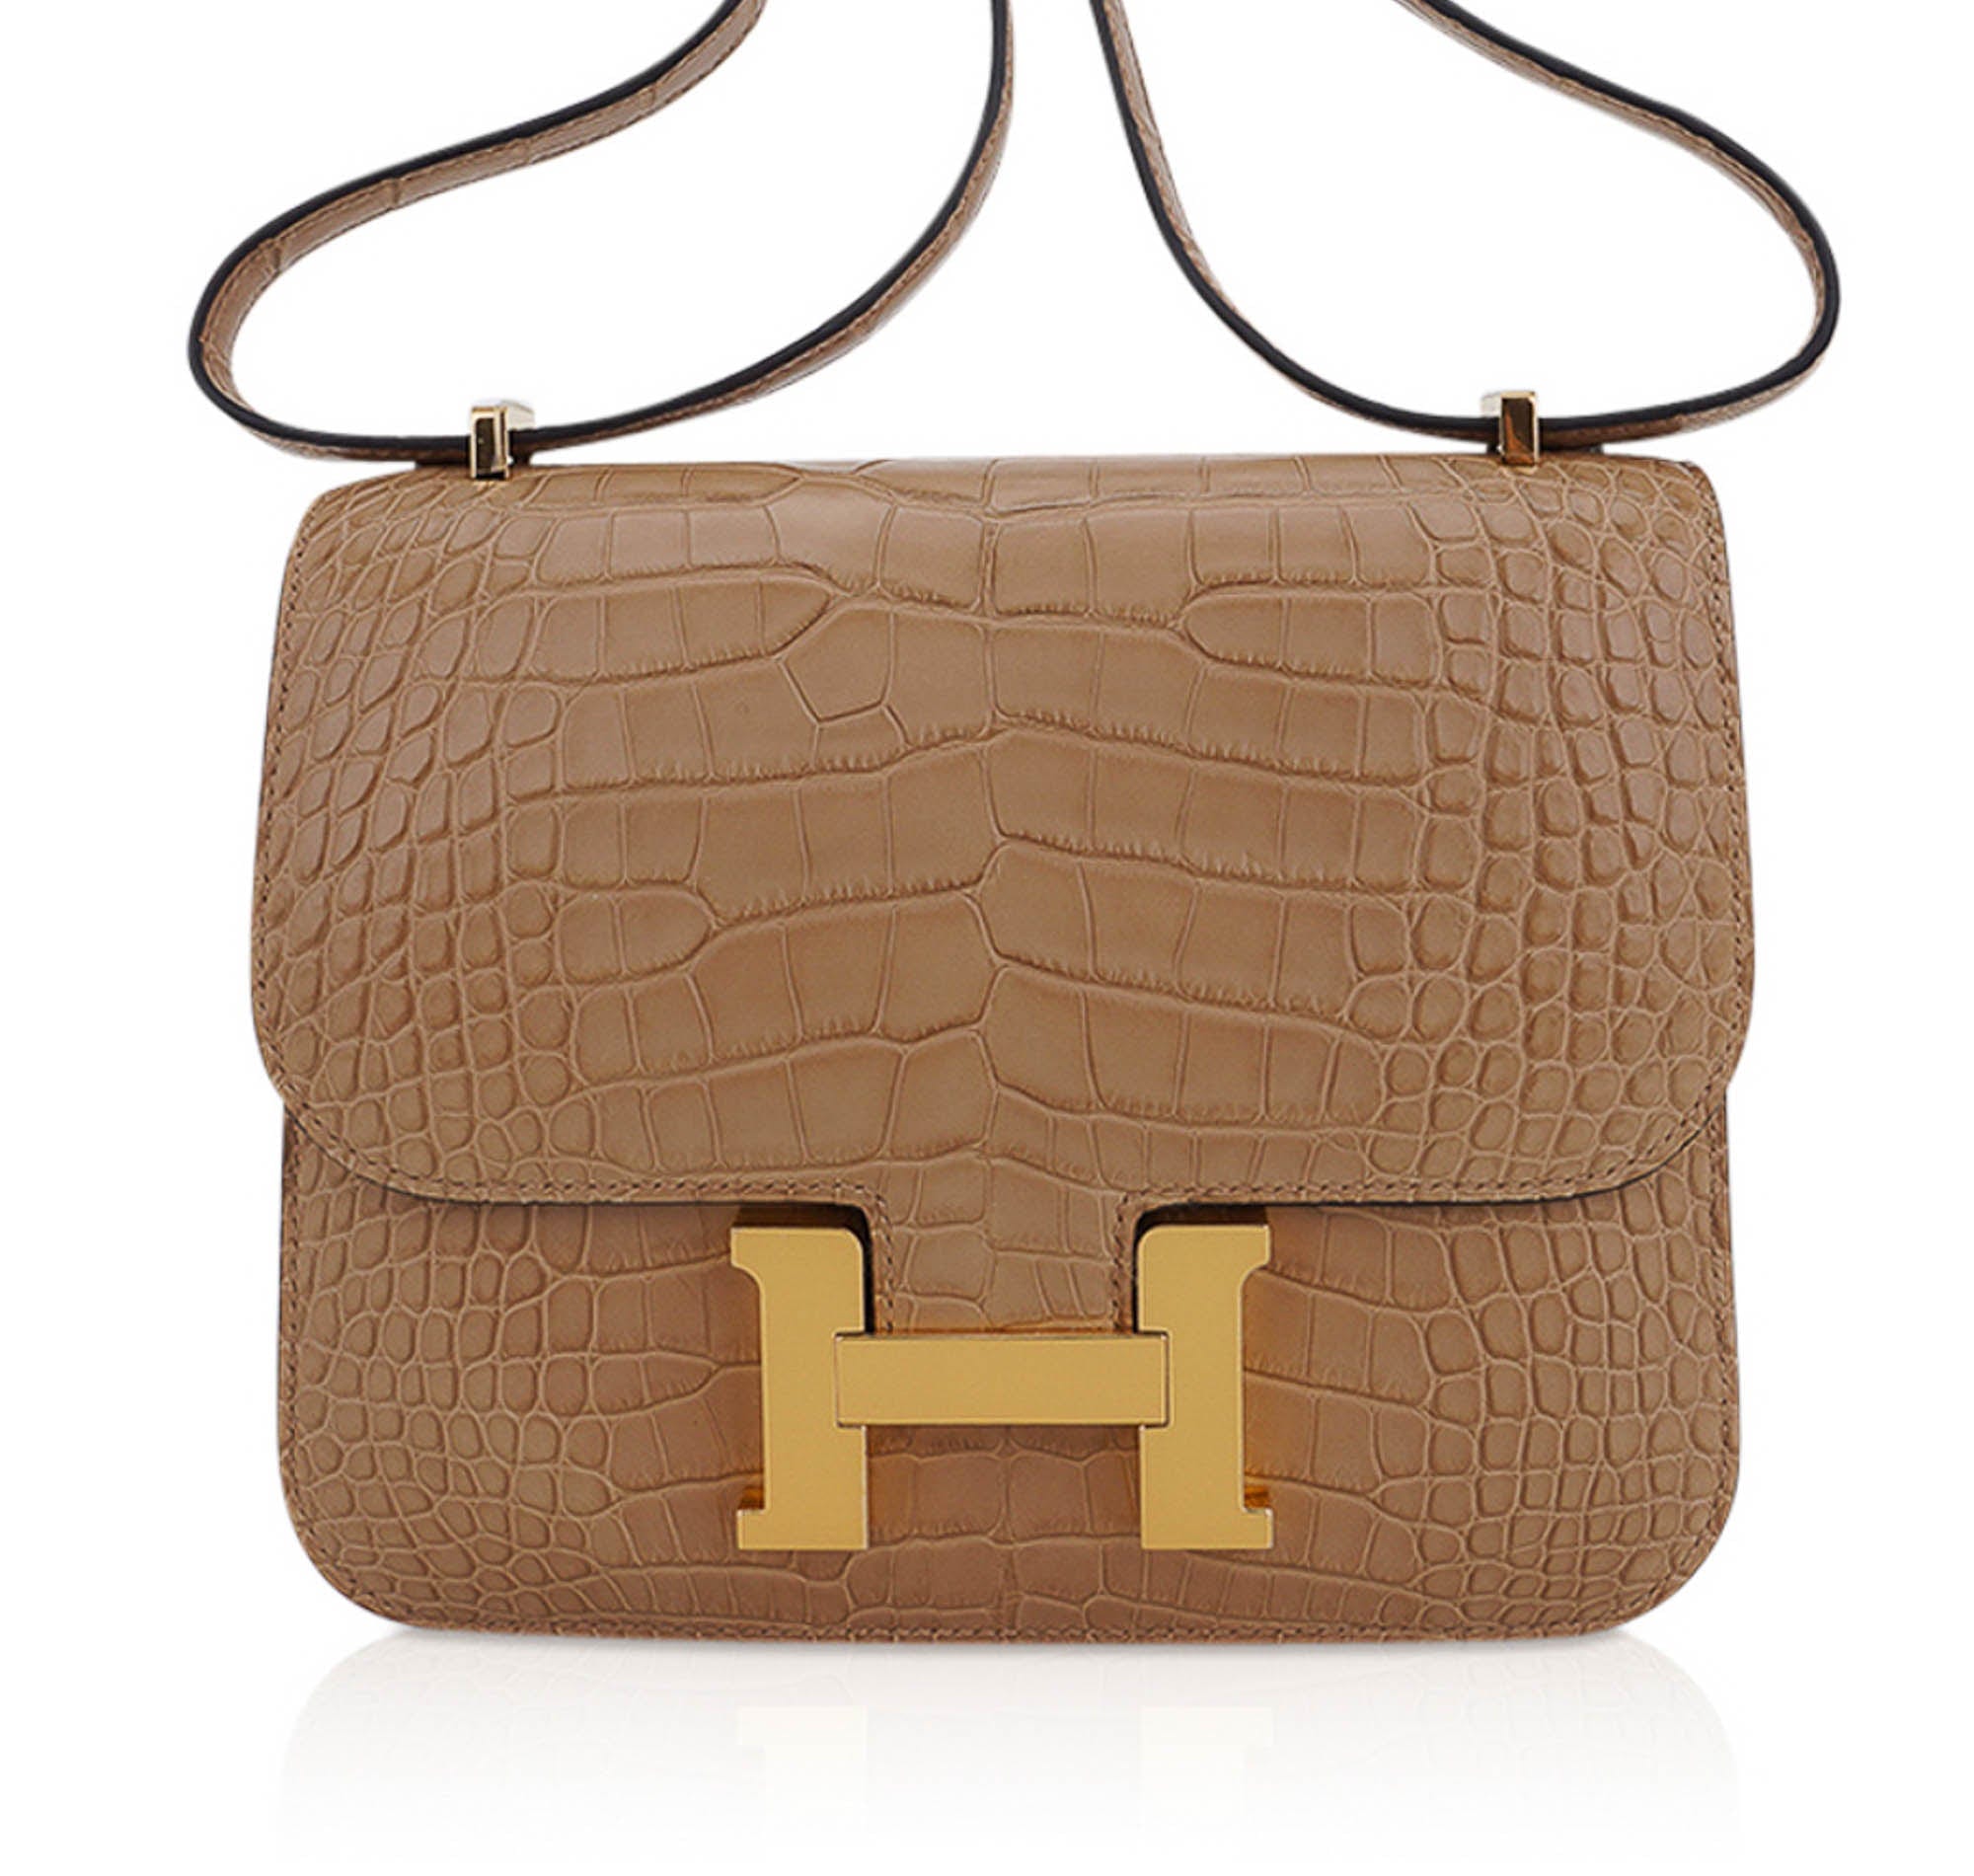 What's the best way to purchase an Hermes Epsom Constance Long To Go wallet  without the markup? I've bought Hermes items before (scarves/products on  their website, bags secondhand). : r/luxurypurses